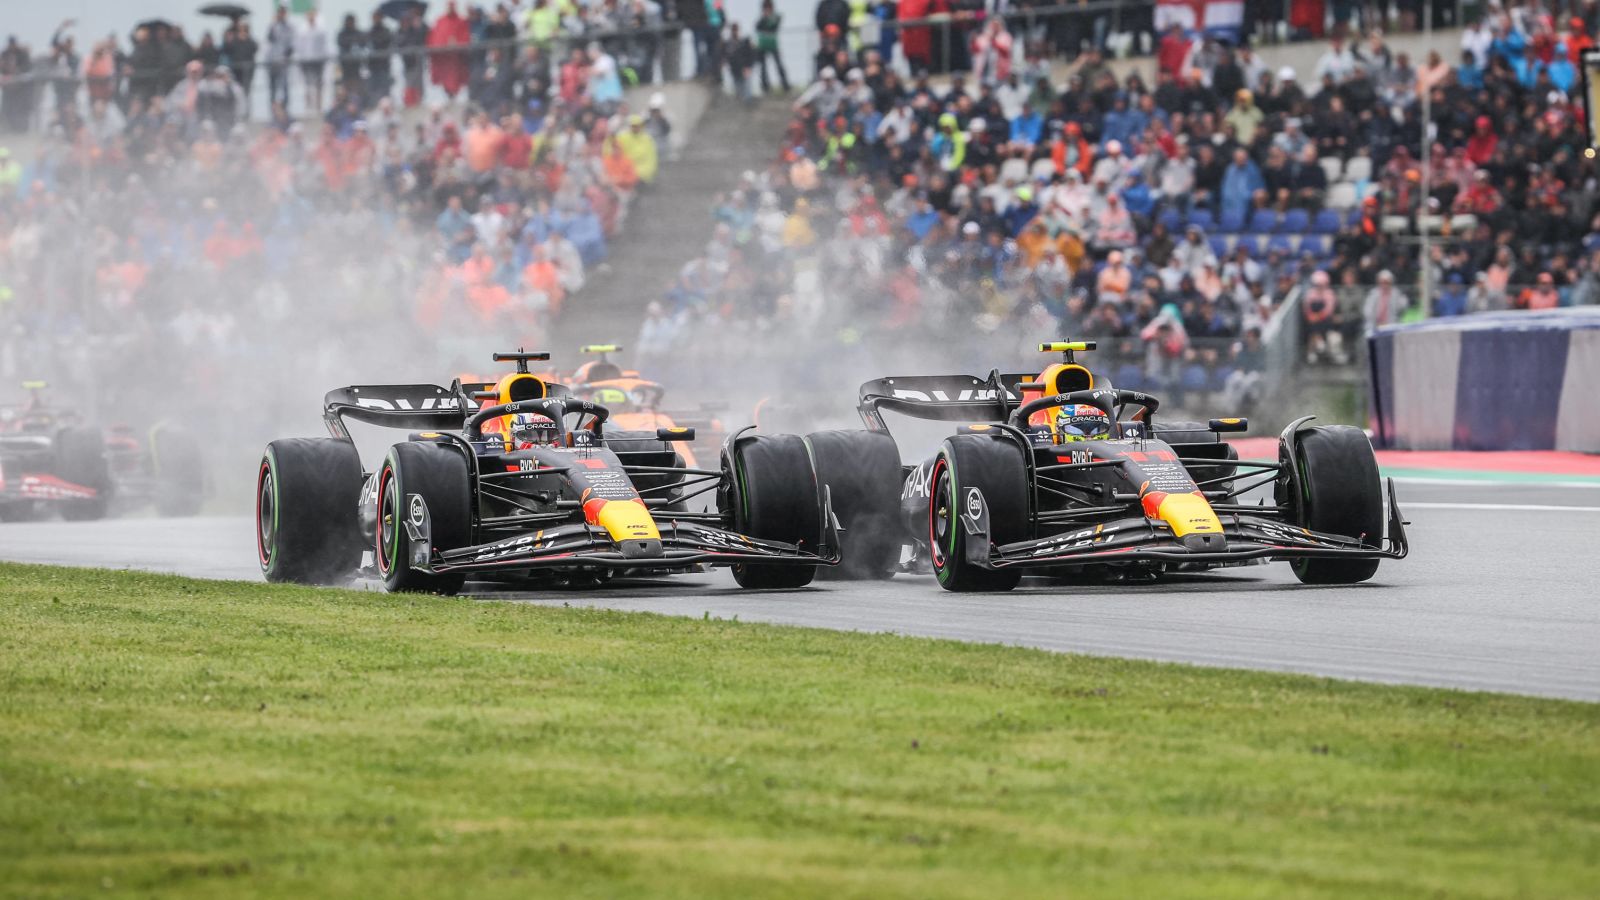 Max Verstappen takes to the grass in battle with Red Bull team-mate Sergio Perez on the opening lap of the Austrian Grand Prix sprint race. Styria, July 2023.